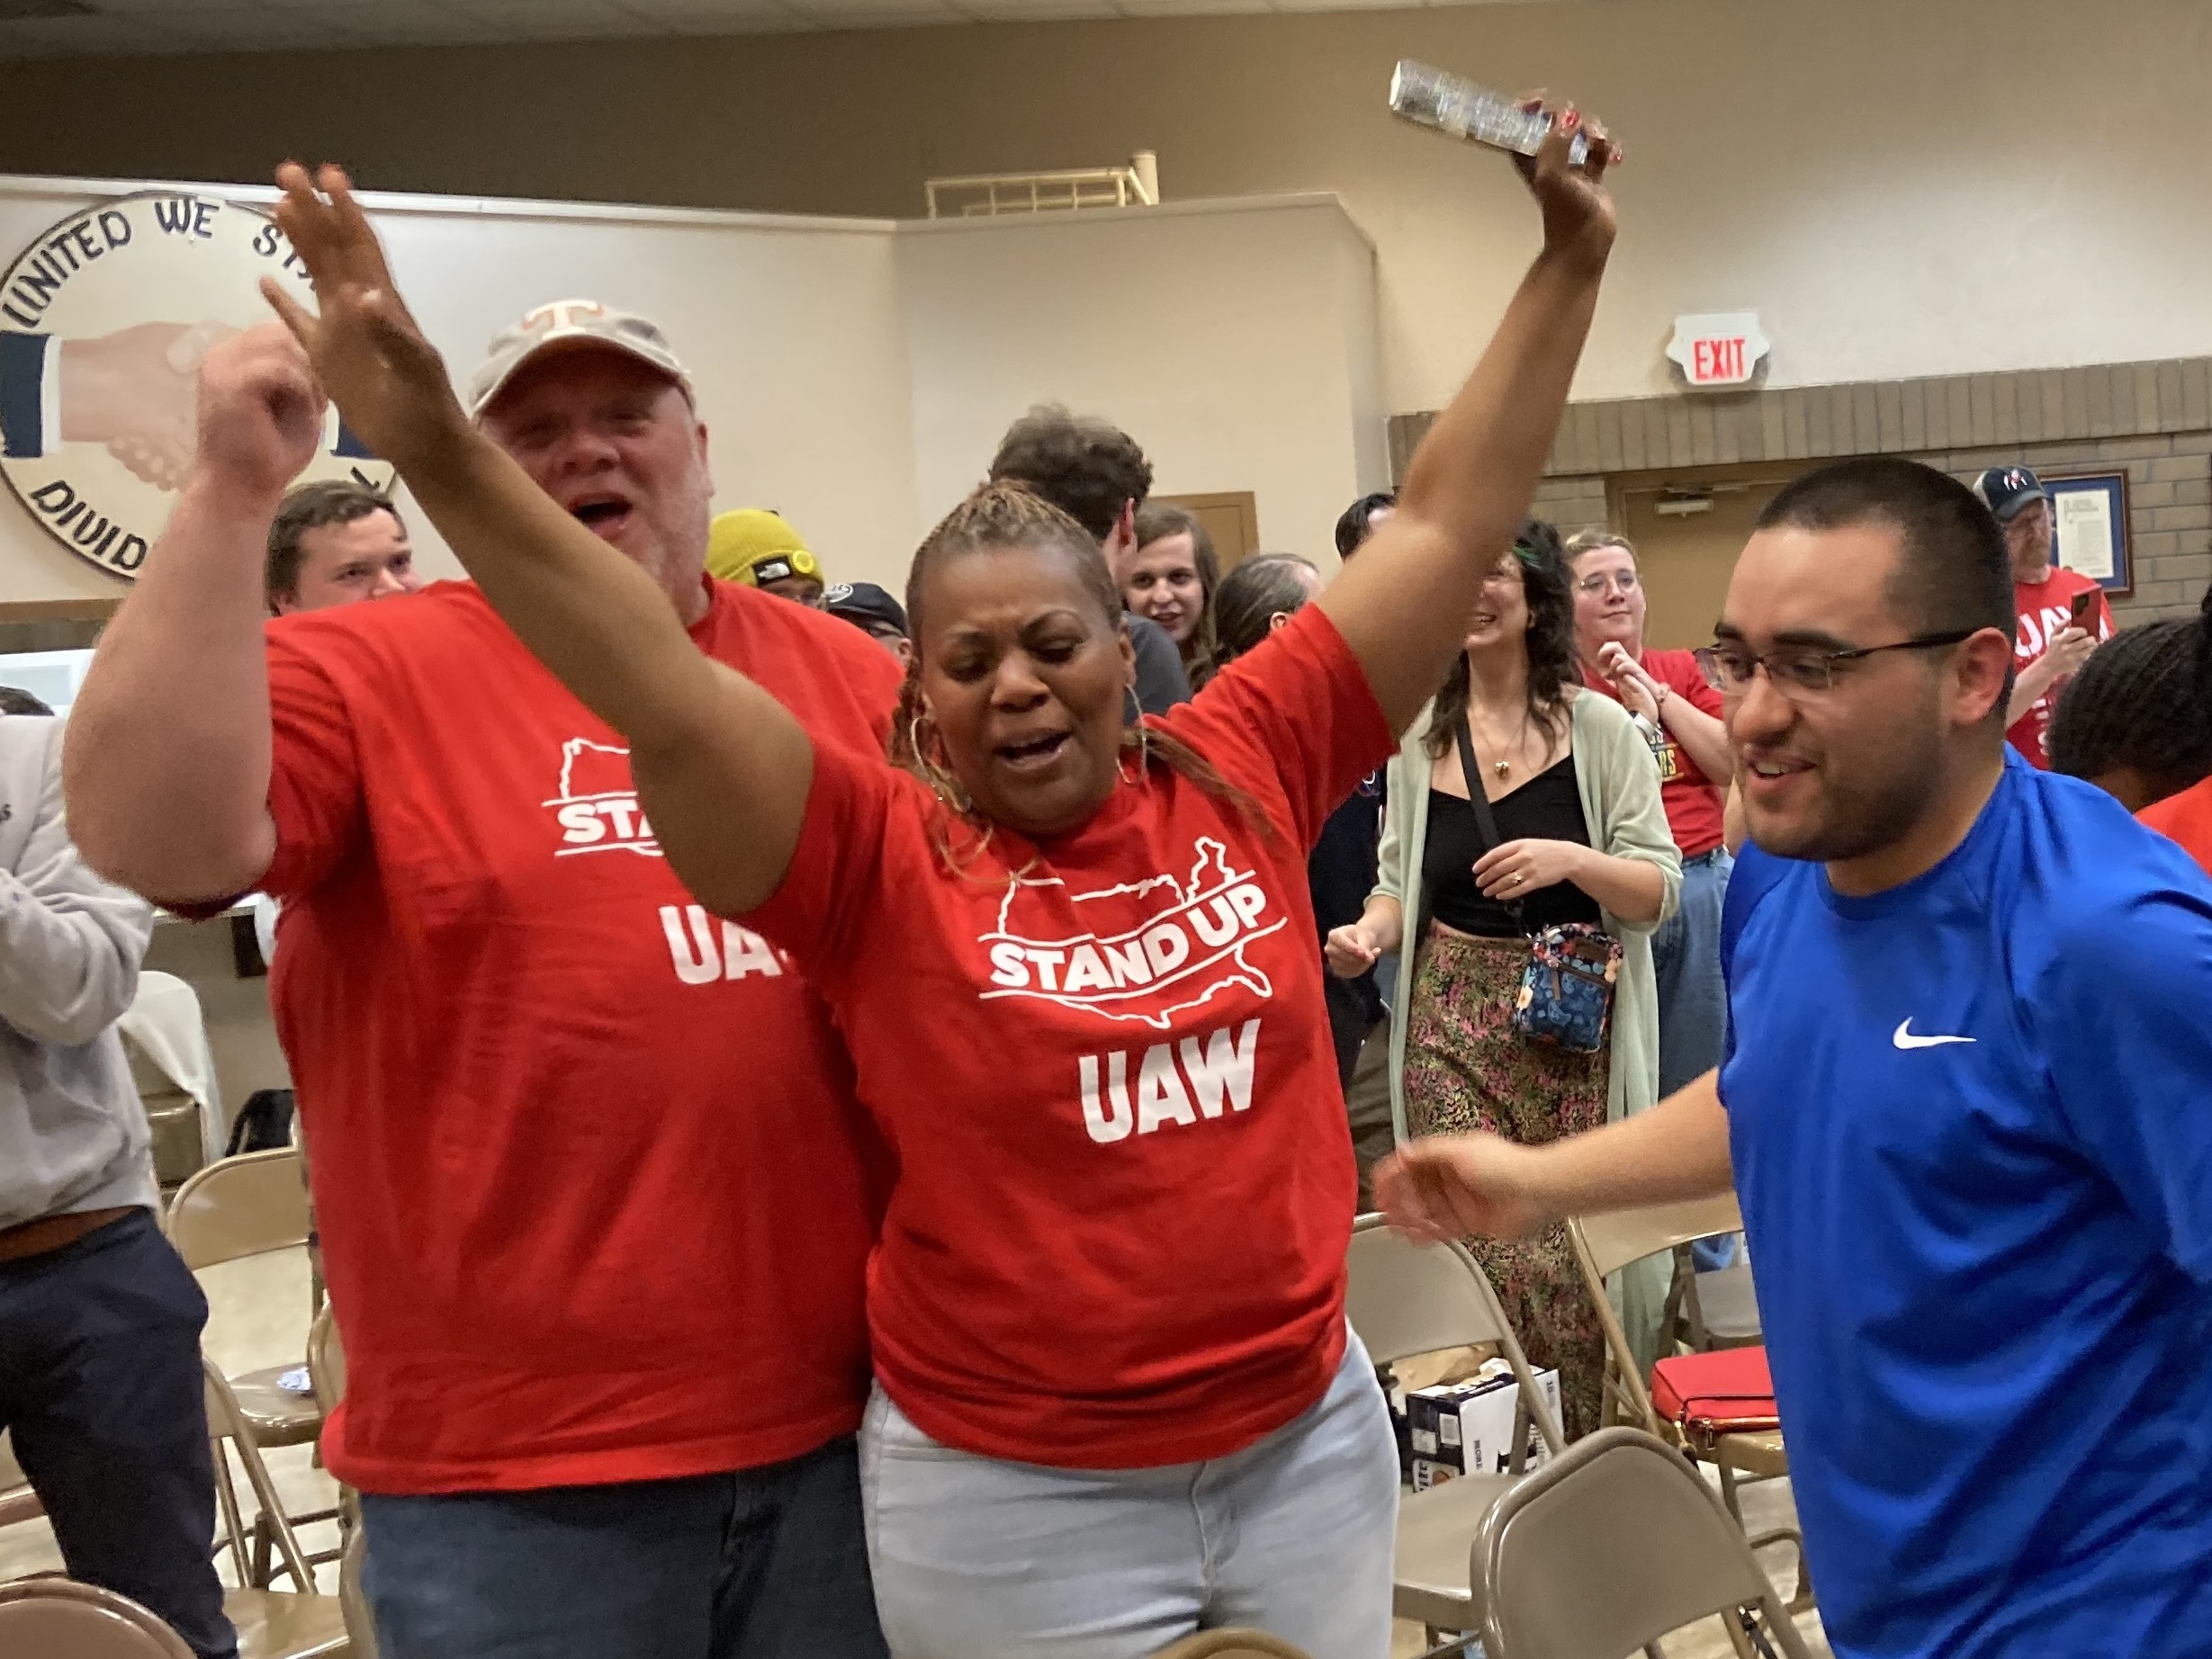 Volkswagen workers in Chattanooga, Tenn., celebrate as results from the union election at the auto plant come in on April 19, 2024. The final tally was 2,628 in favor of unionizing and 985 against.